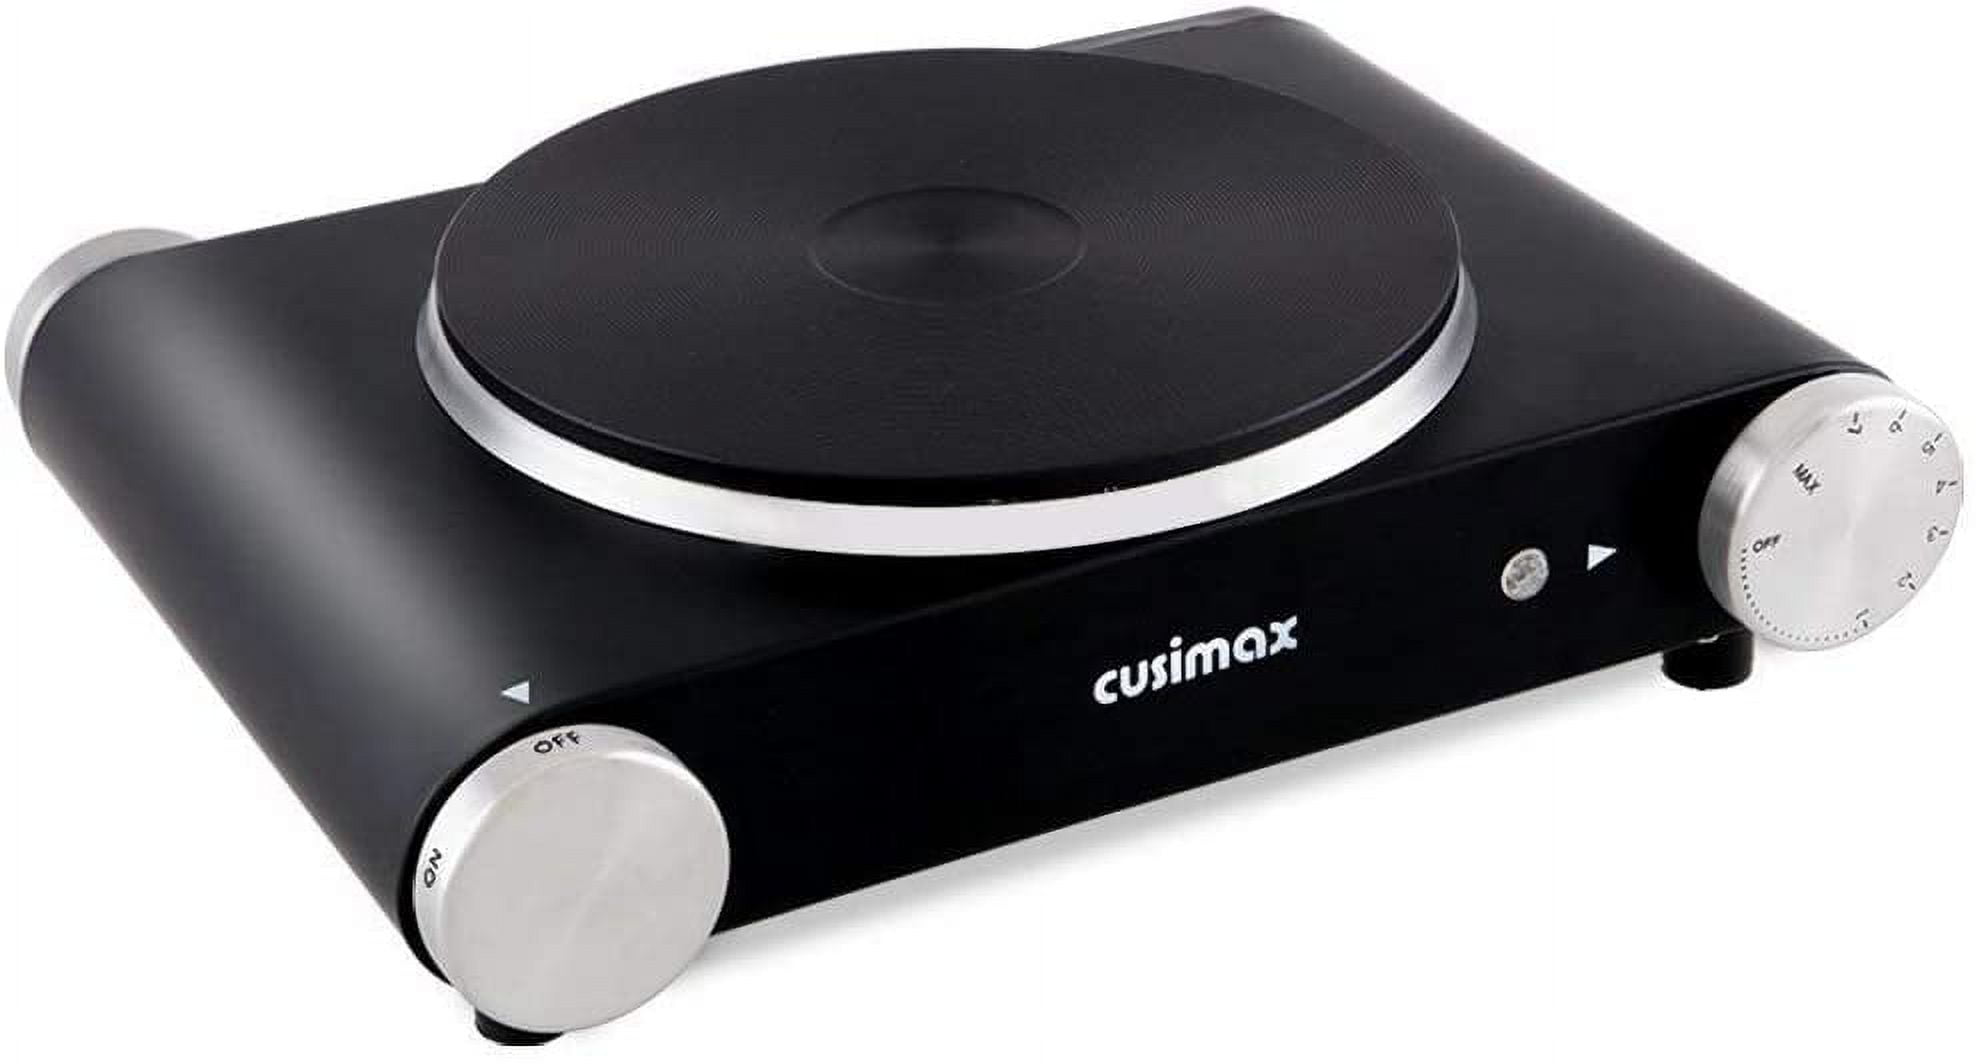 Cusimax Hot Plate Electric Burner Single Burner Cast Iron Hot Plates for Cooking Portable Burner 1500W with Adjustable Temperature Control Stainless